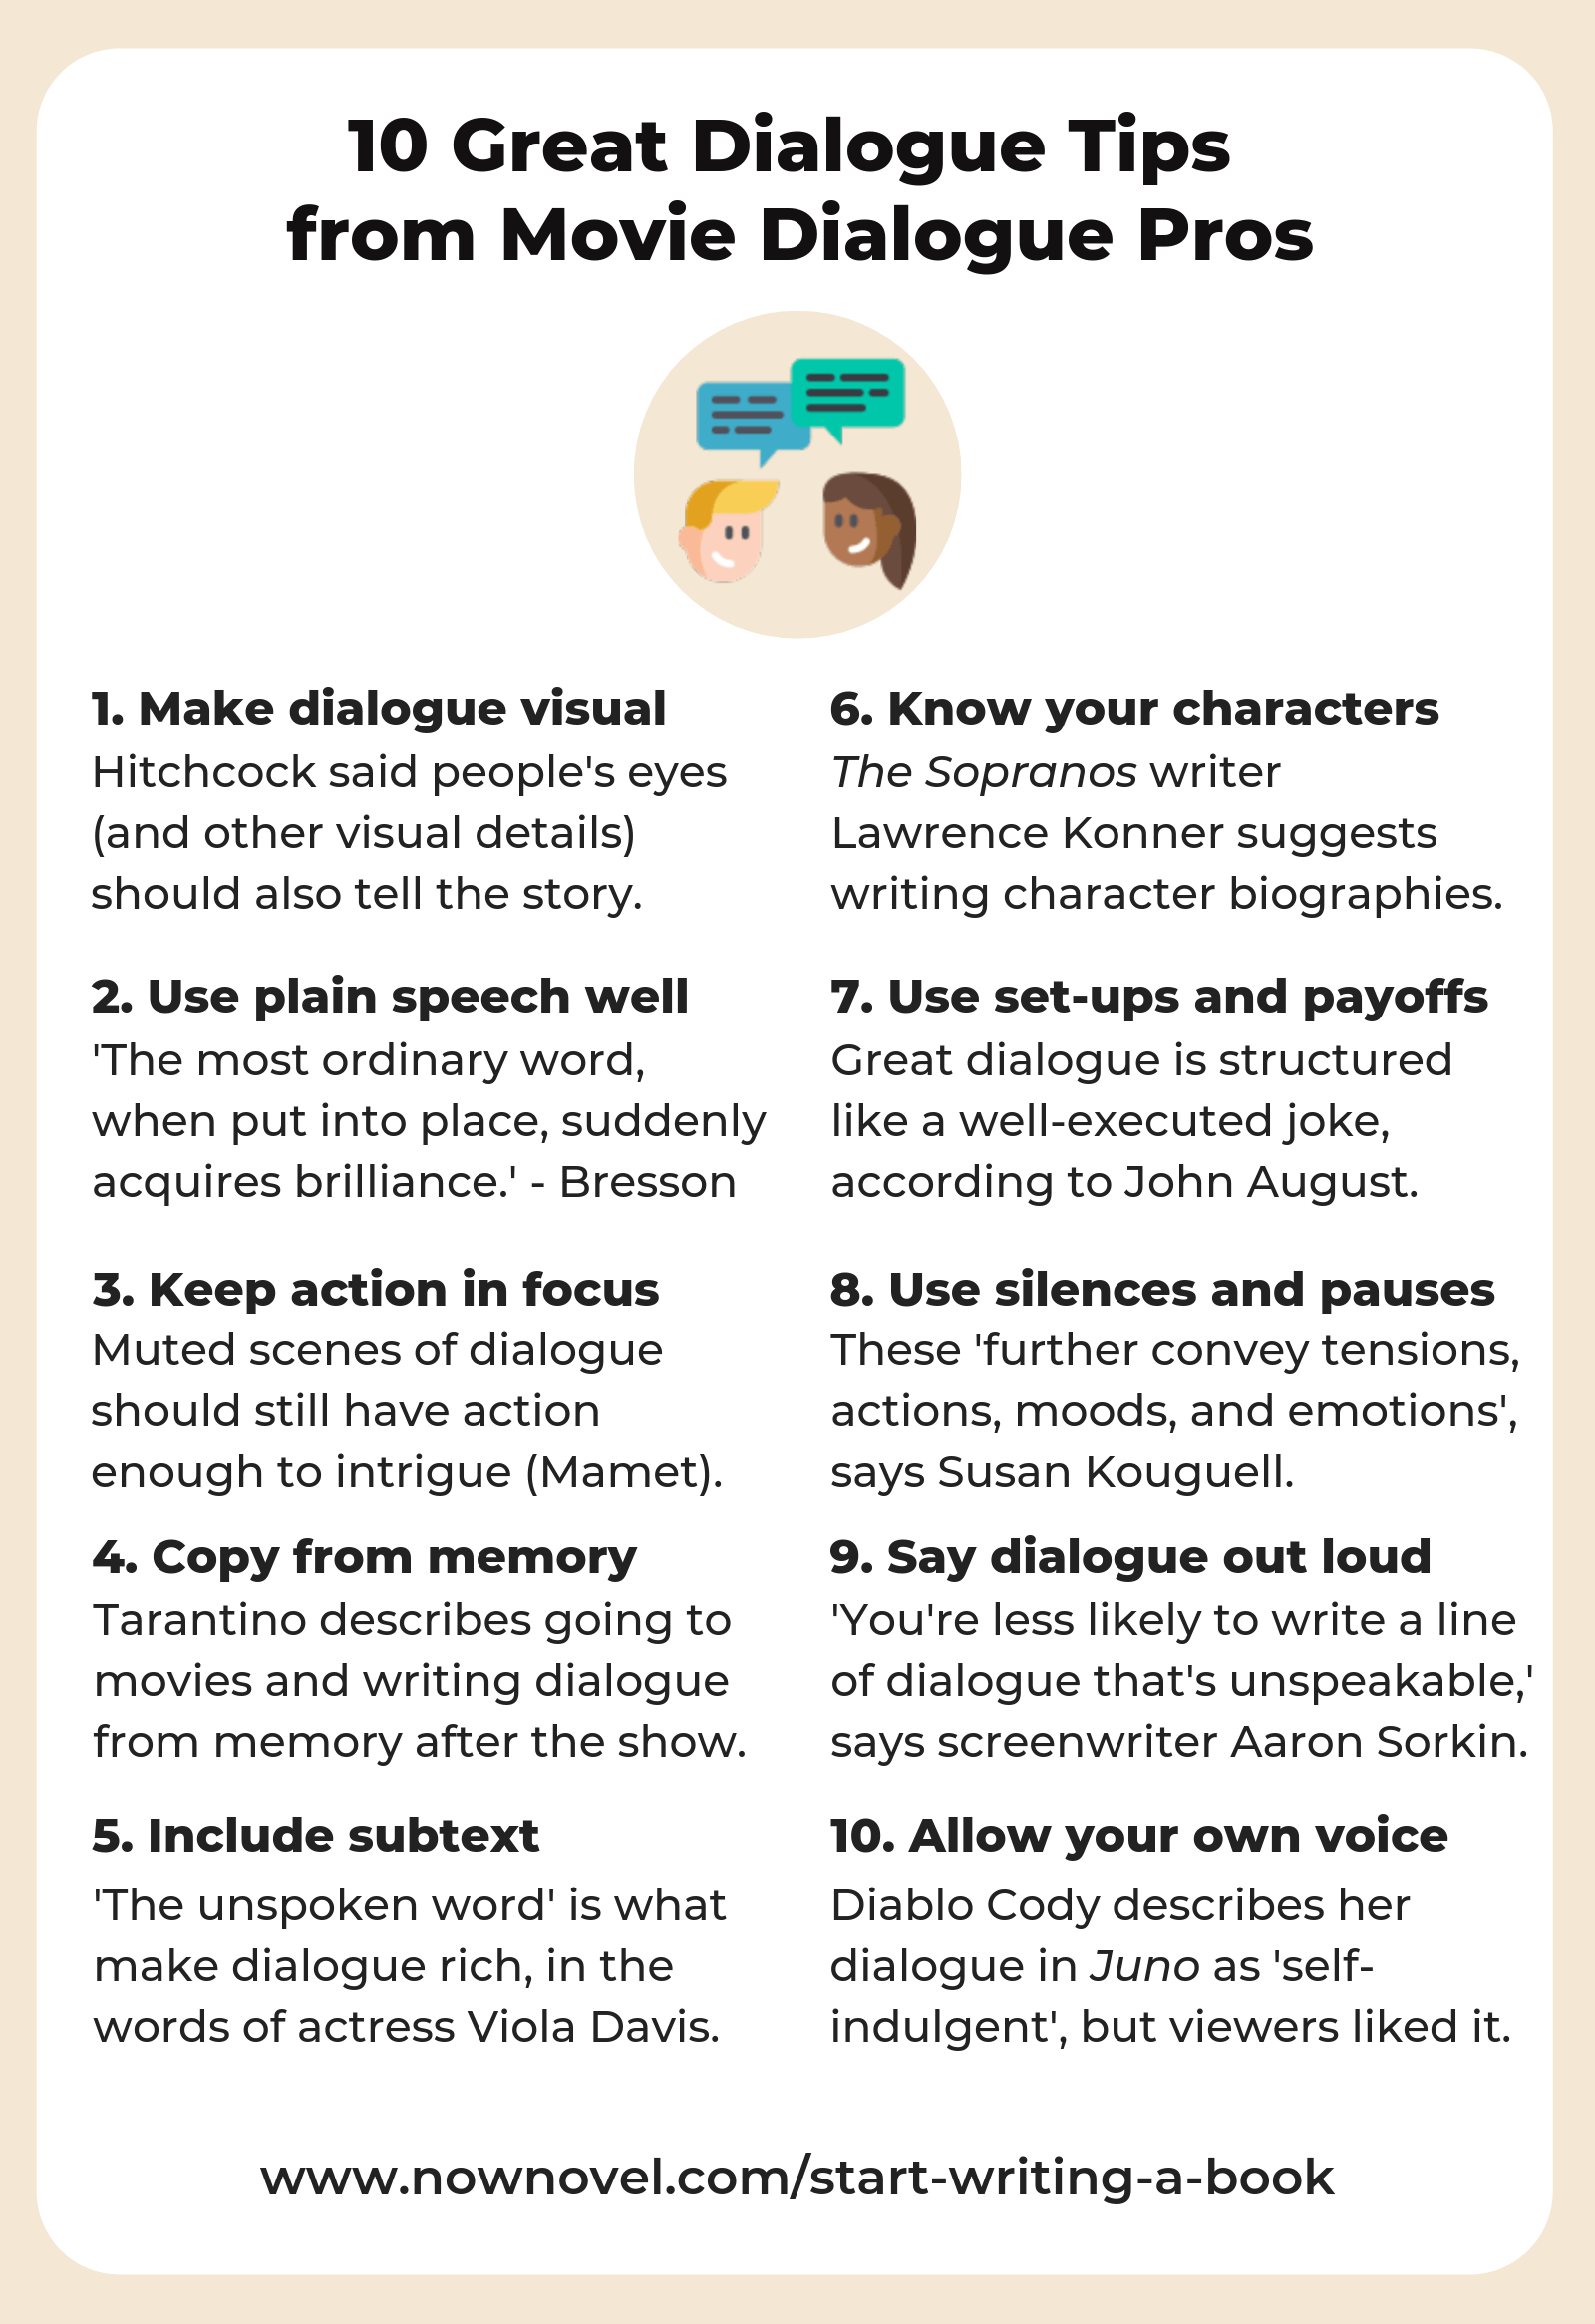 Infographic - great dialogue tips from movie pros | Now Novel